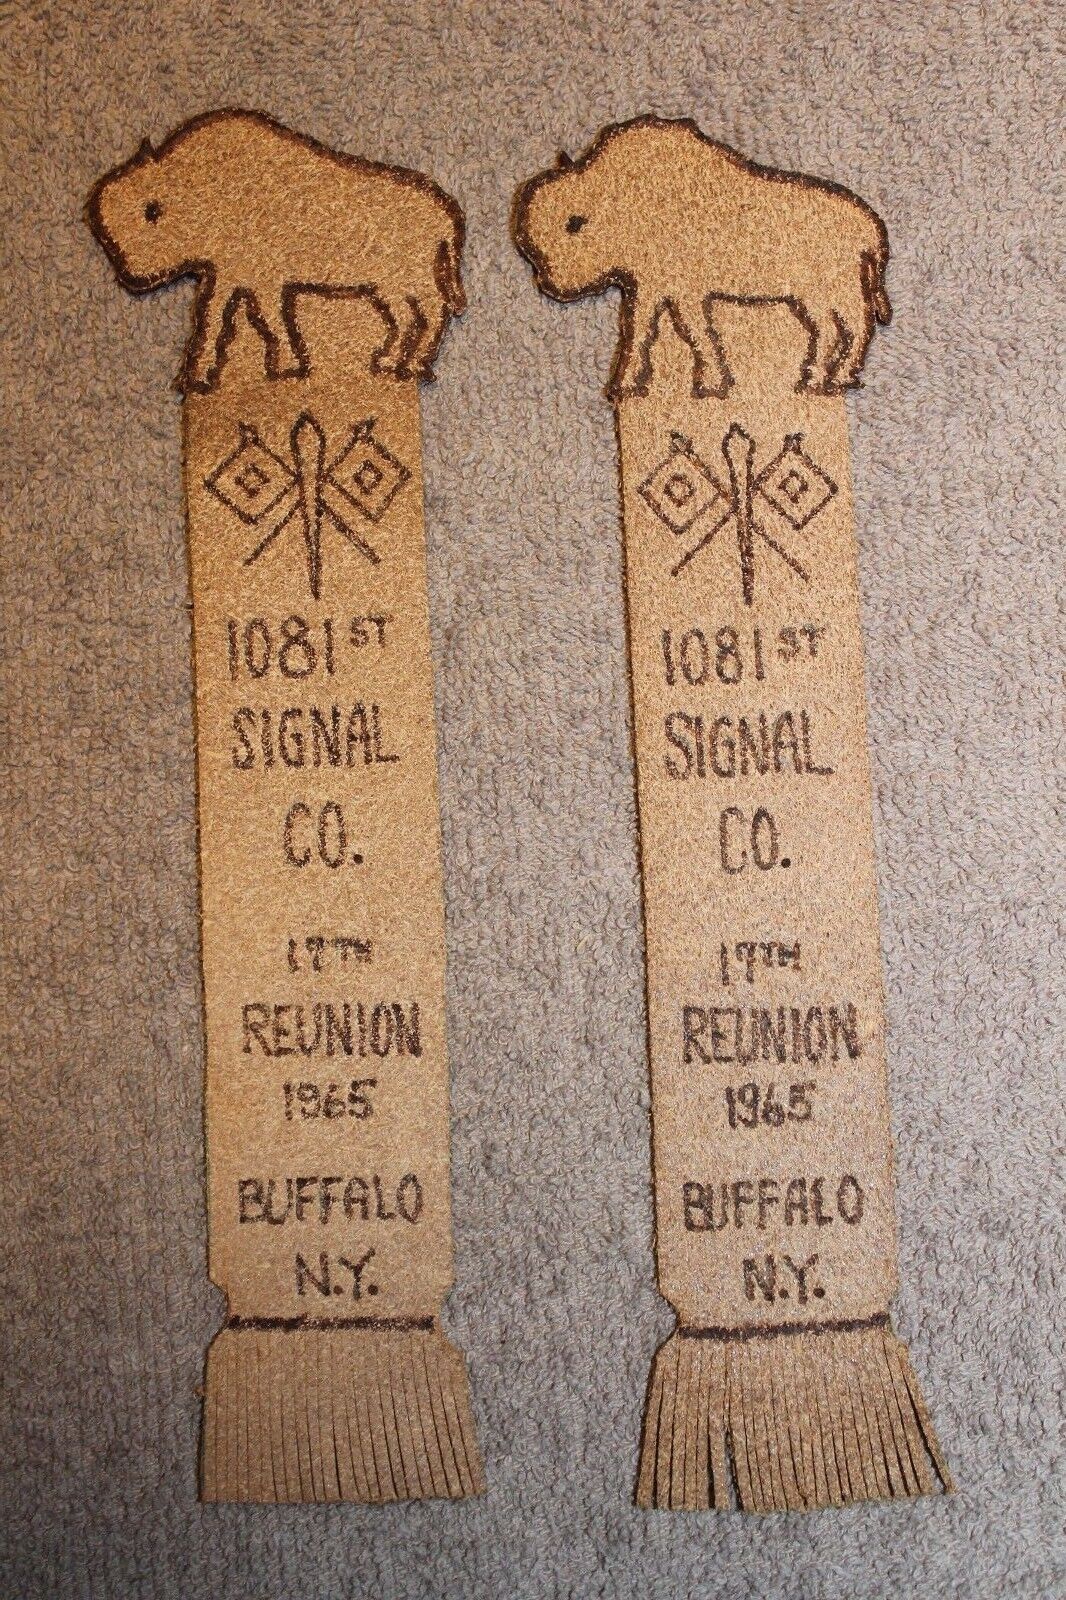 Two Original WW2 U.S. Army 1081st Signal Co. Reunion Leather Book Marks, 1965 d 